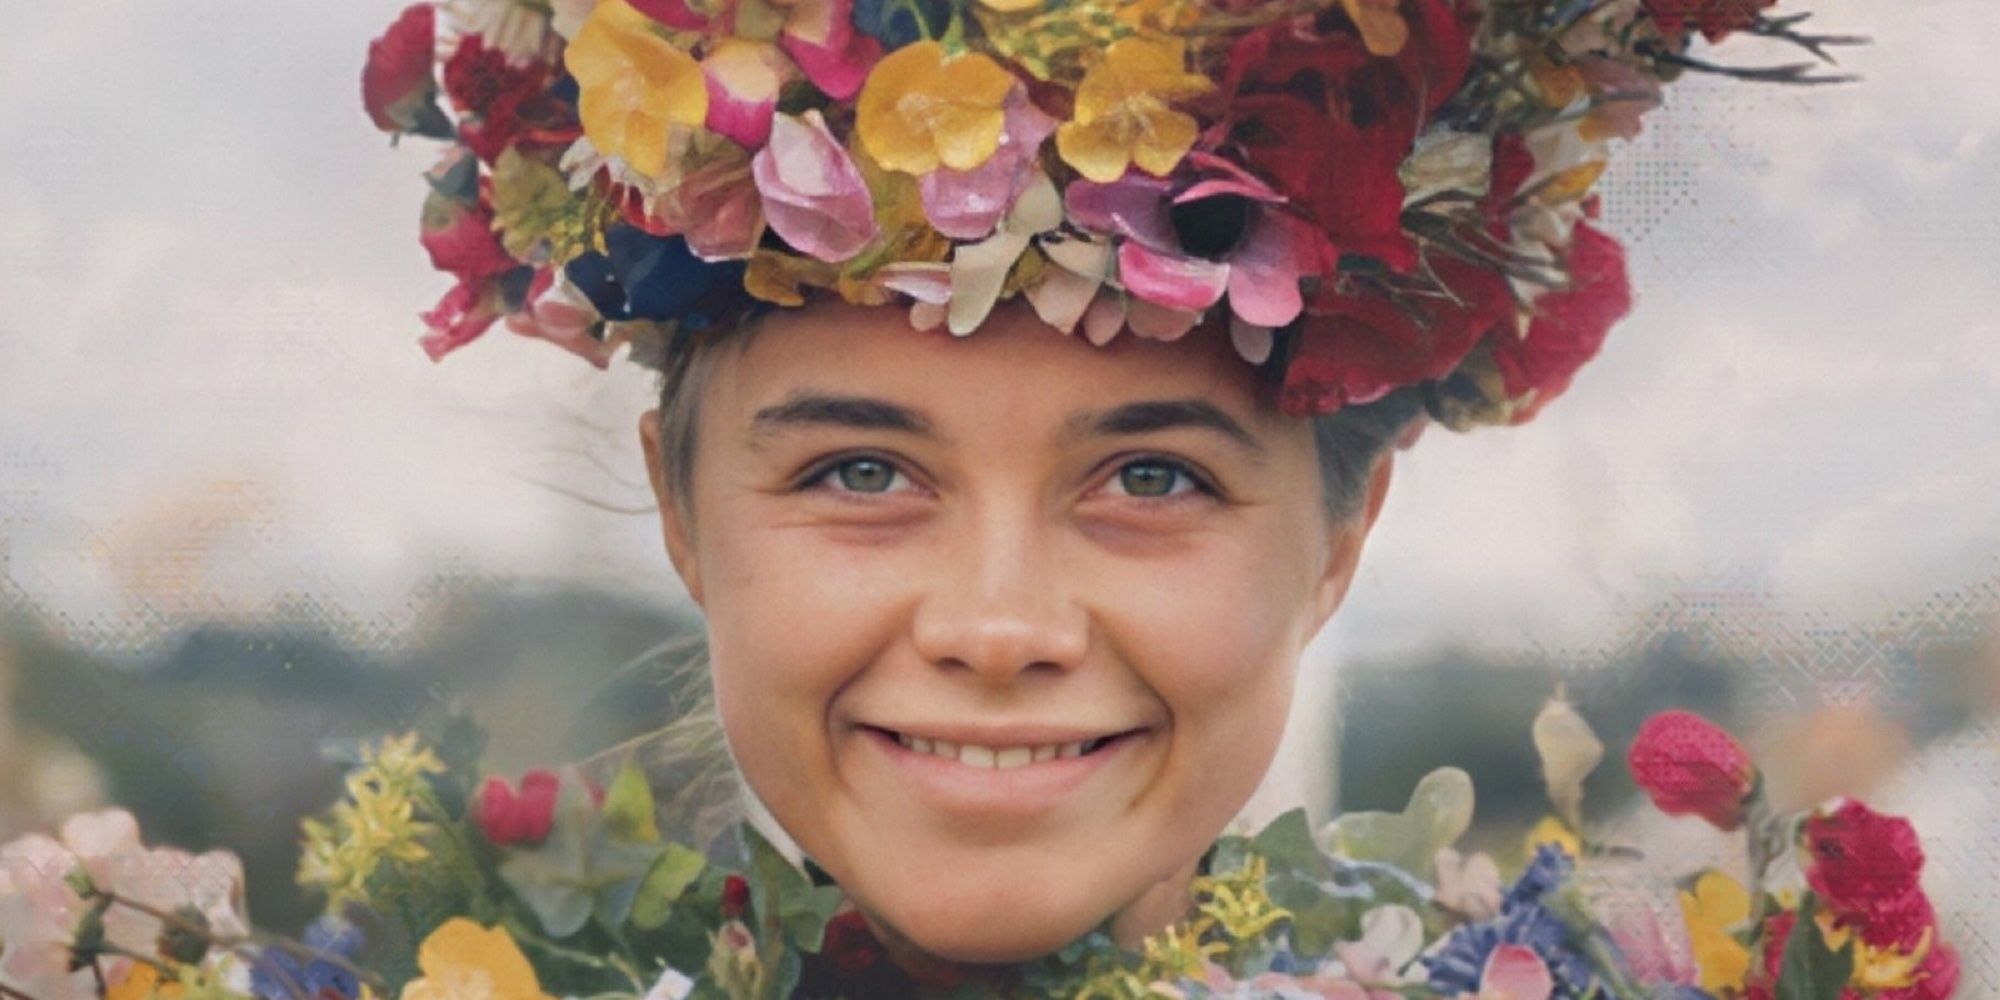 Dani smiling at the end of Midsommar with her corwn of flowers.